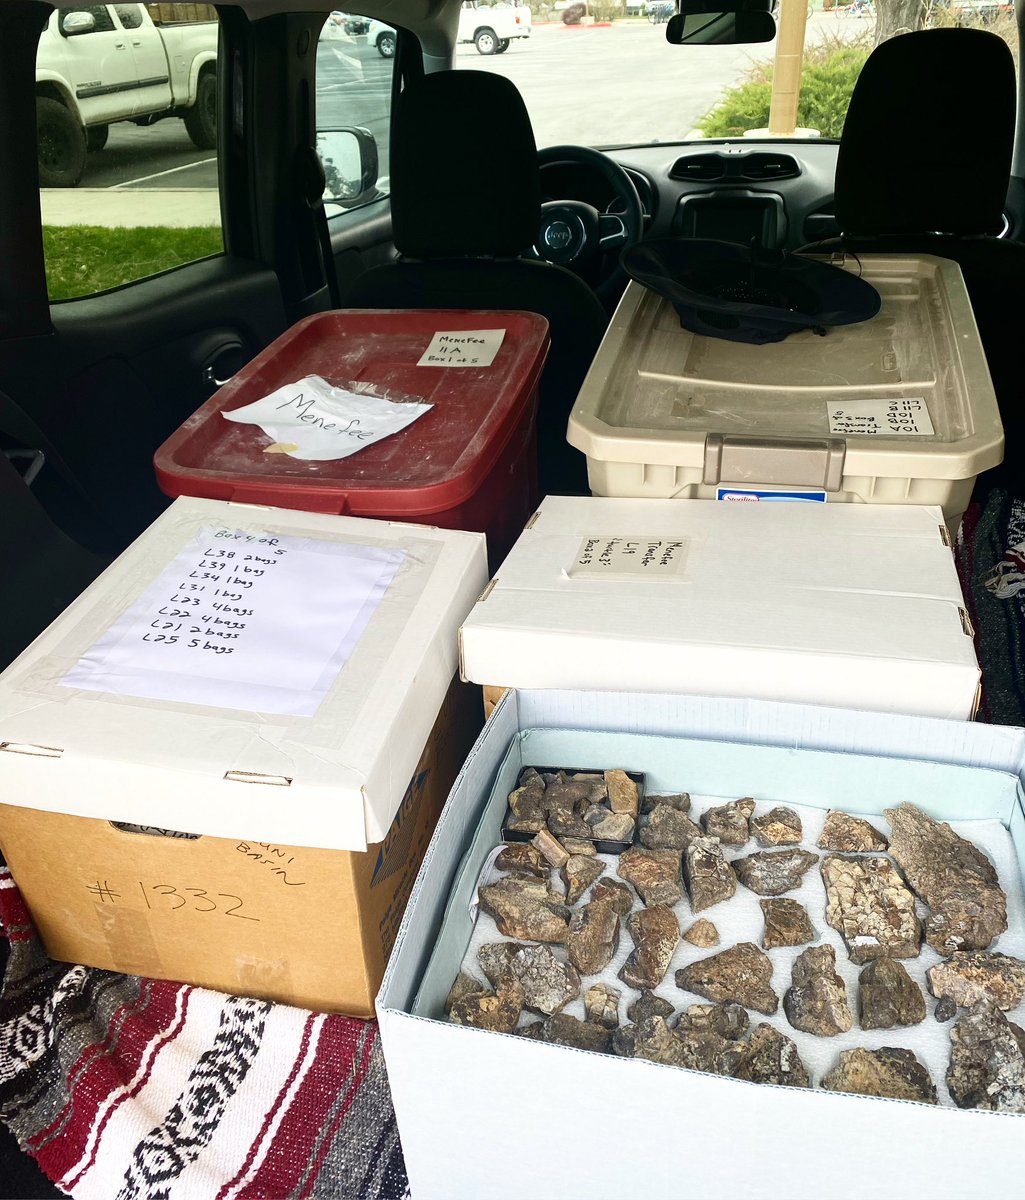 Happy #FossilFriday! What’s in all those boxes? A lot of dinosaur and turtle bones from the Menifee Formation in New Mexico! WSC paleontologists headed up to @nhmu to bring this material to the museum, & we’re excited to go through all the boxes and see what’s inside.